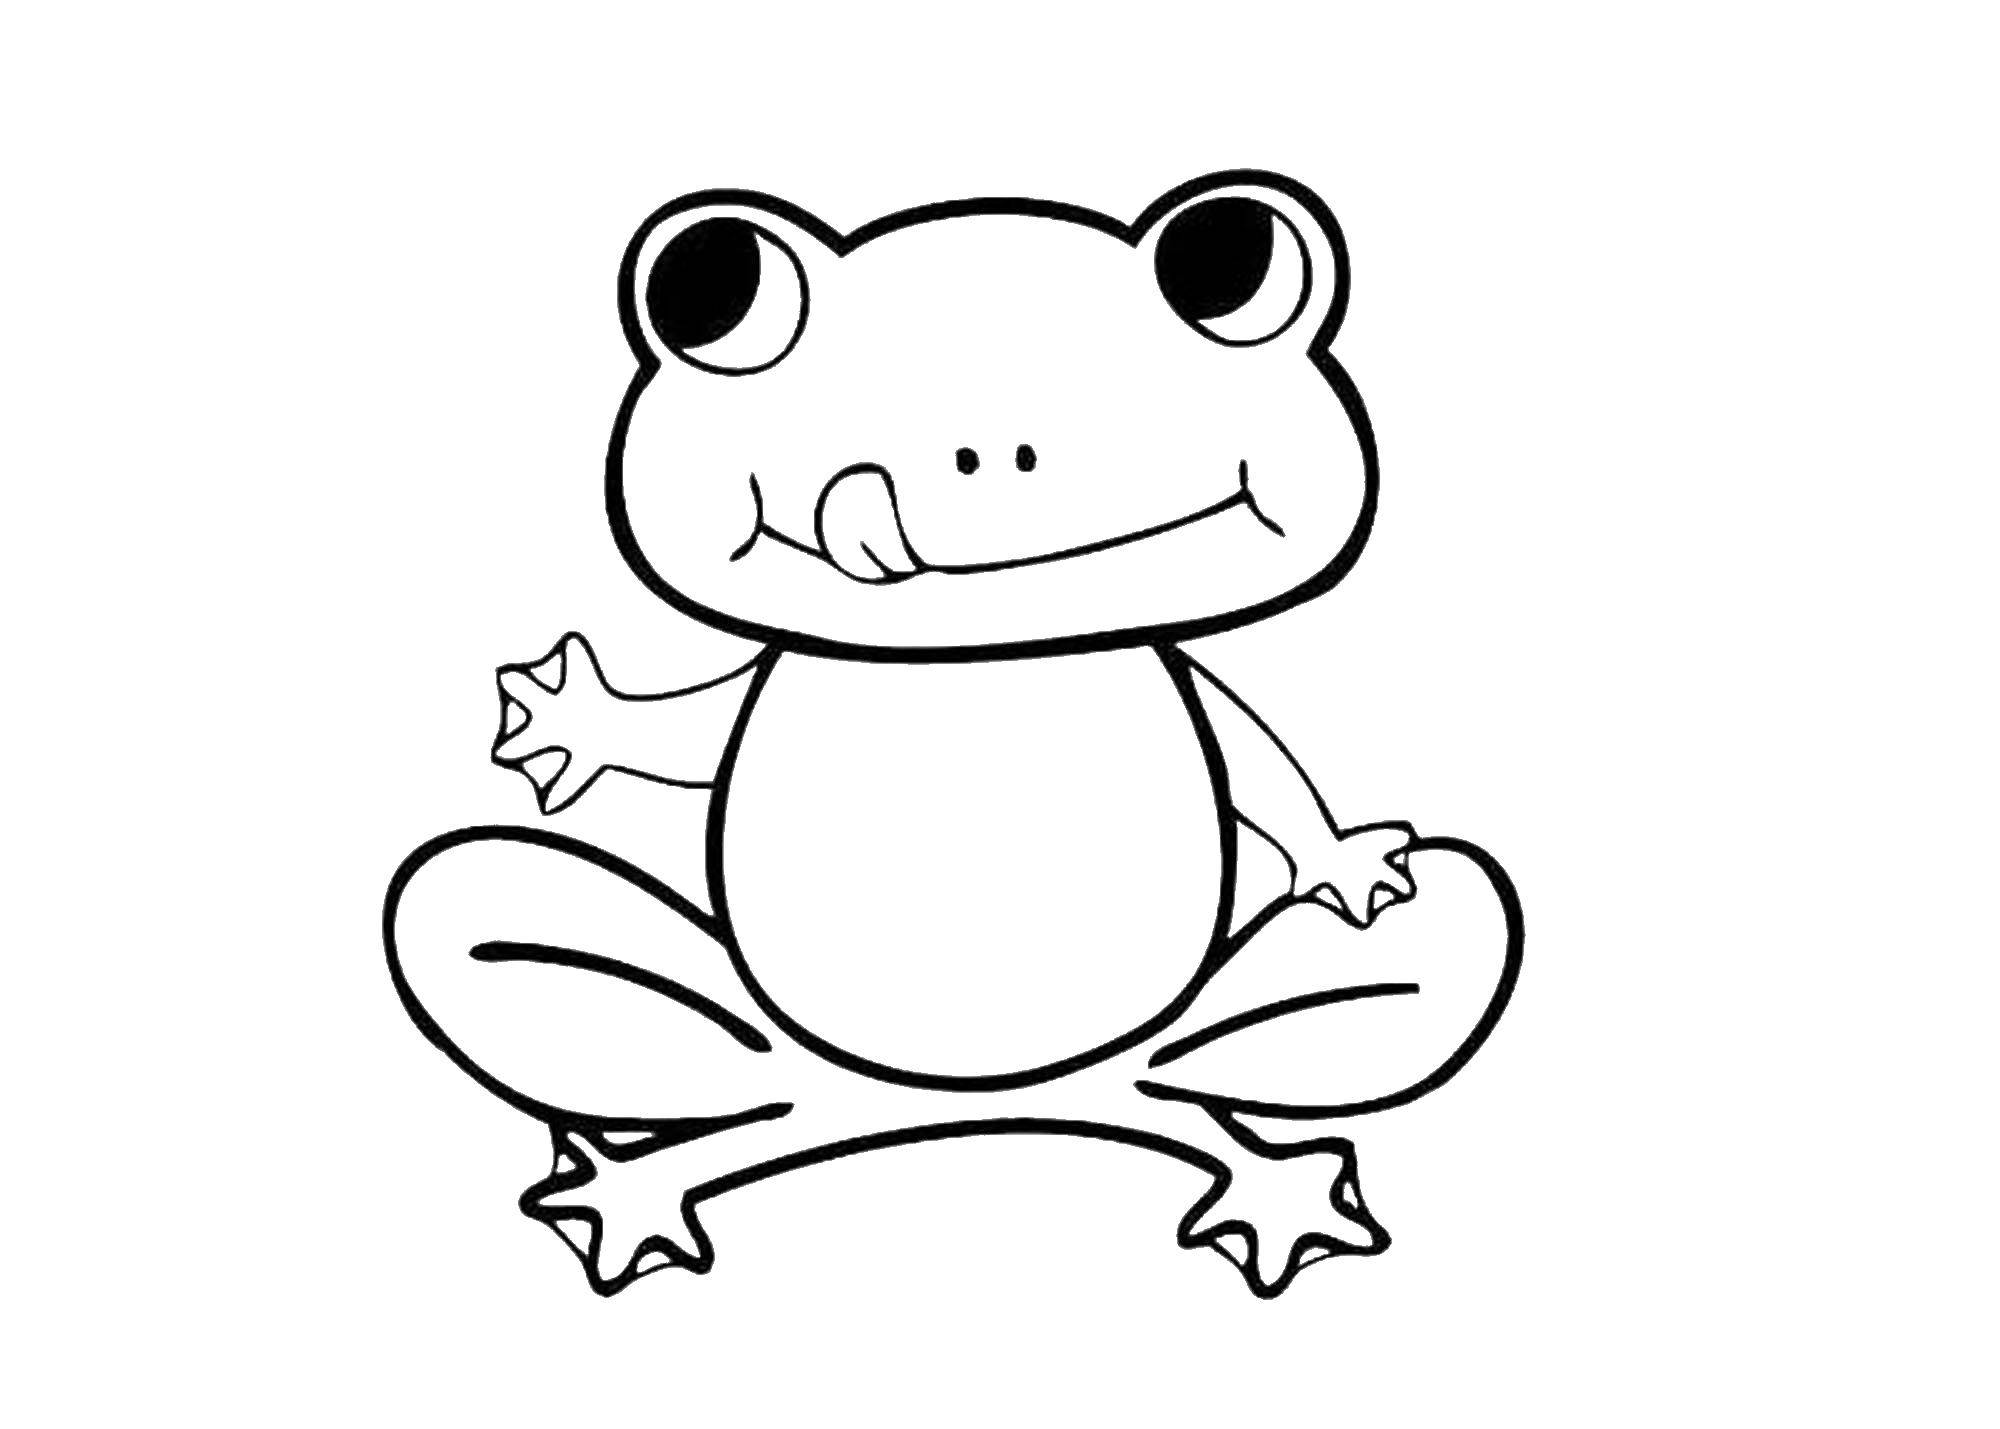 Coloring Cute frog. Category Animals. Tags:  animals, frog.